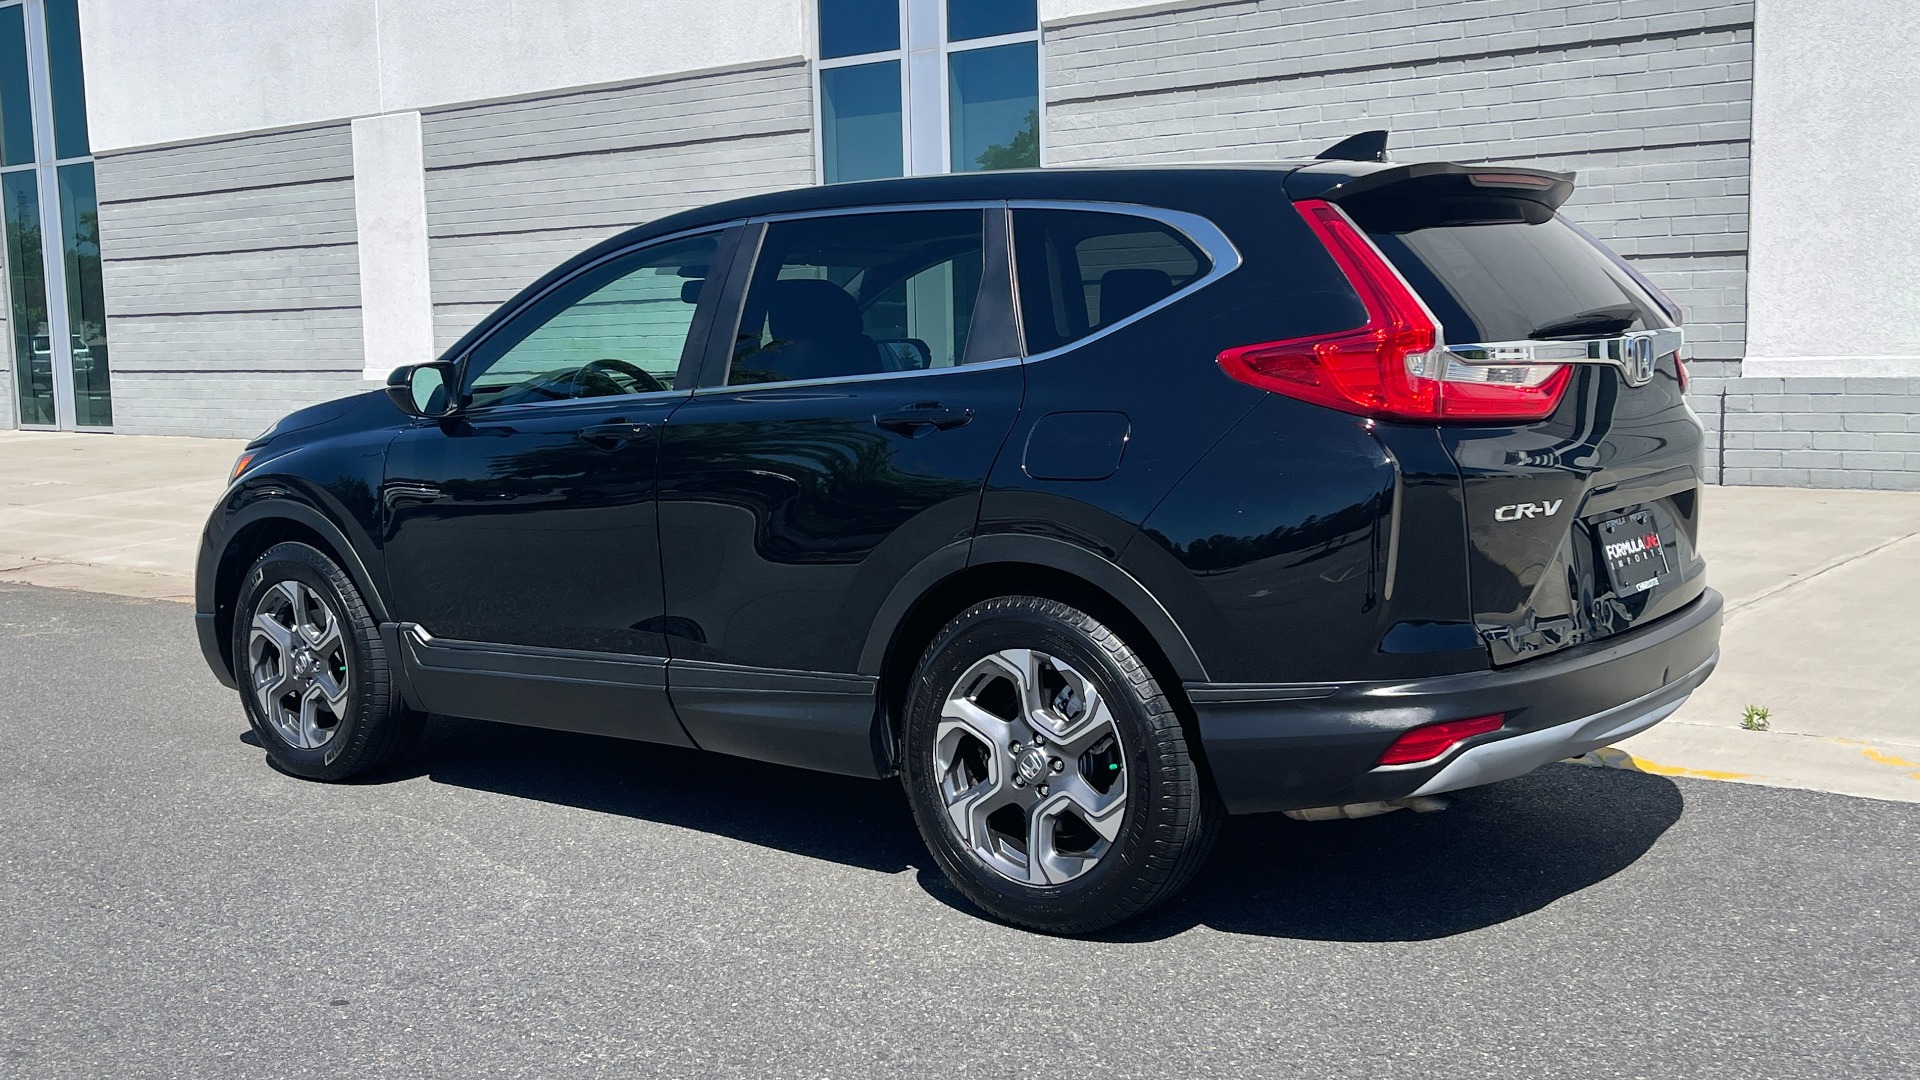 Used 2017 Honda CR-V EX-L / 1.5L TURBO / SUNROOF / BLIND SPOT SYSTEM / REARVIEW for sale Sold at Formula Imports in Charlotte NC 28227 5